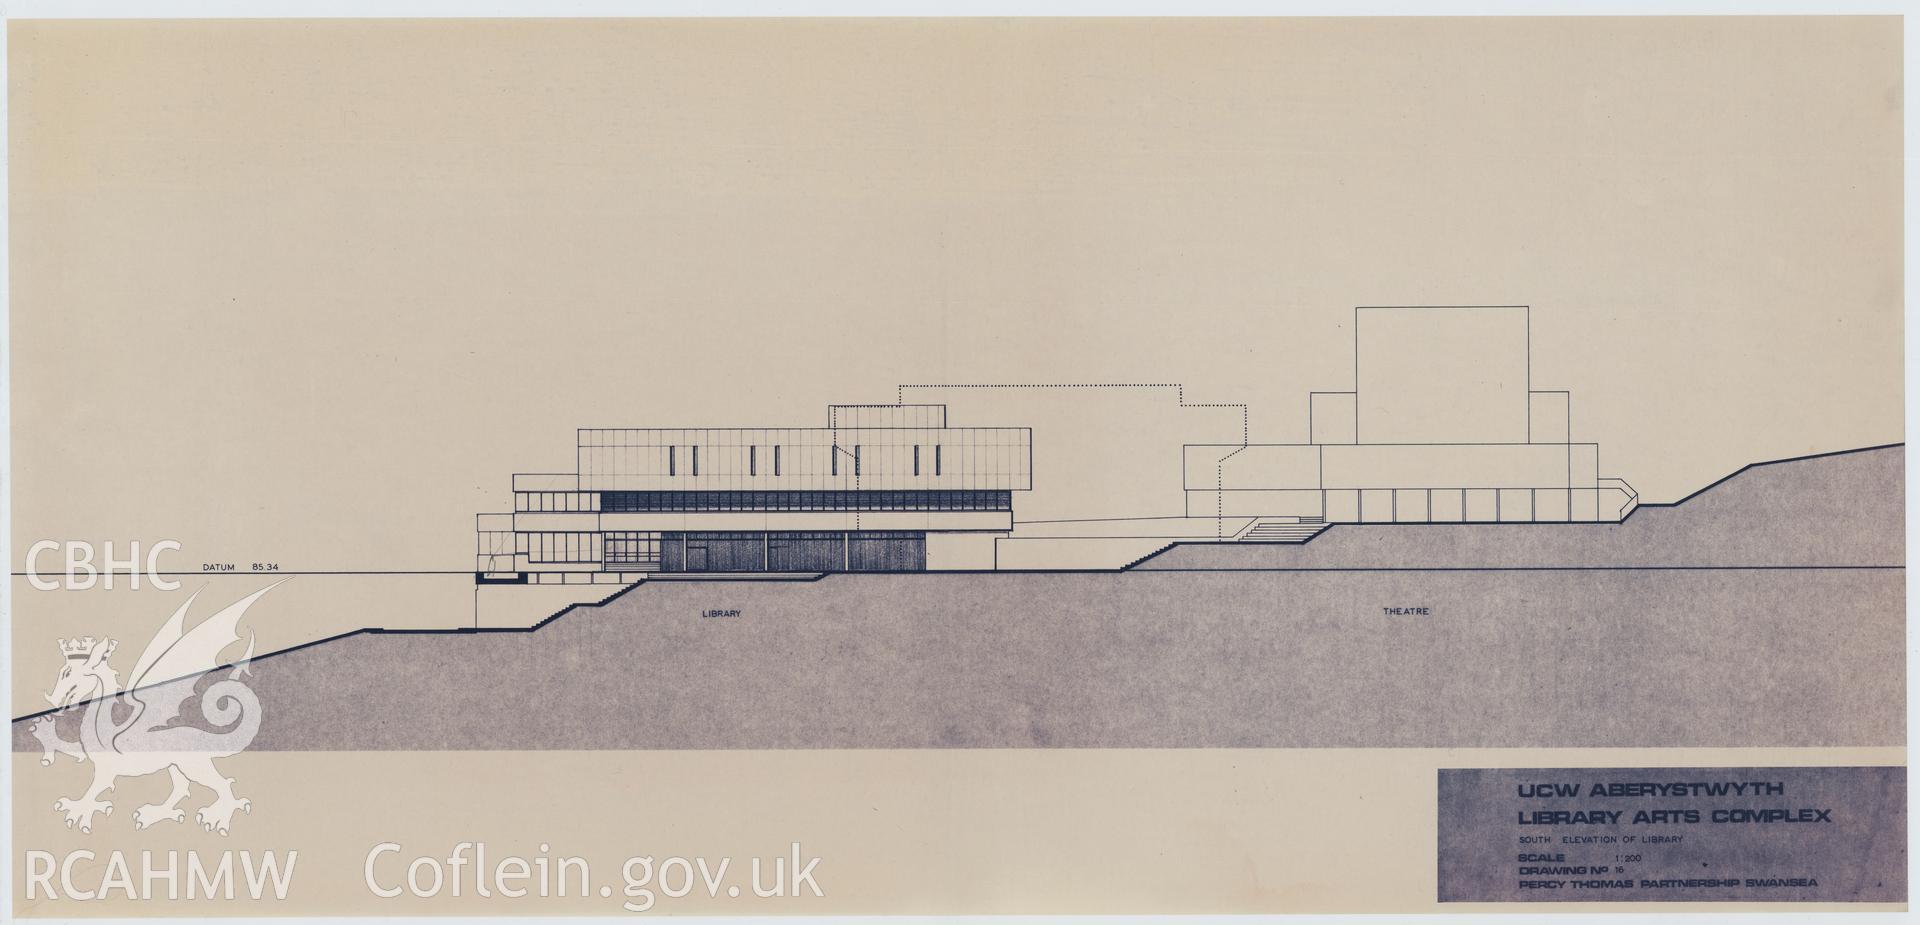 Digital copy of Drawing No 16, South Elevation of Library at the proposed Library Arts Complex at University College Aberystwyth, produced by Percy Thomas Partnership. Scale 1:200.